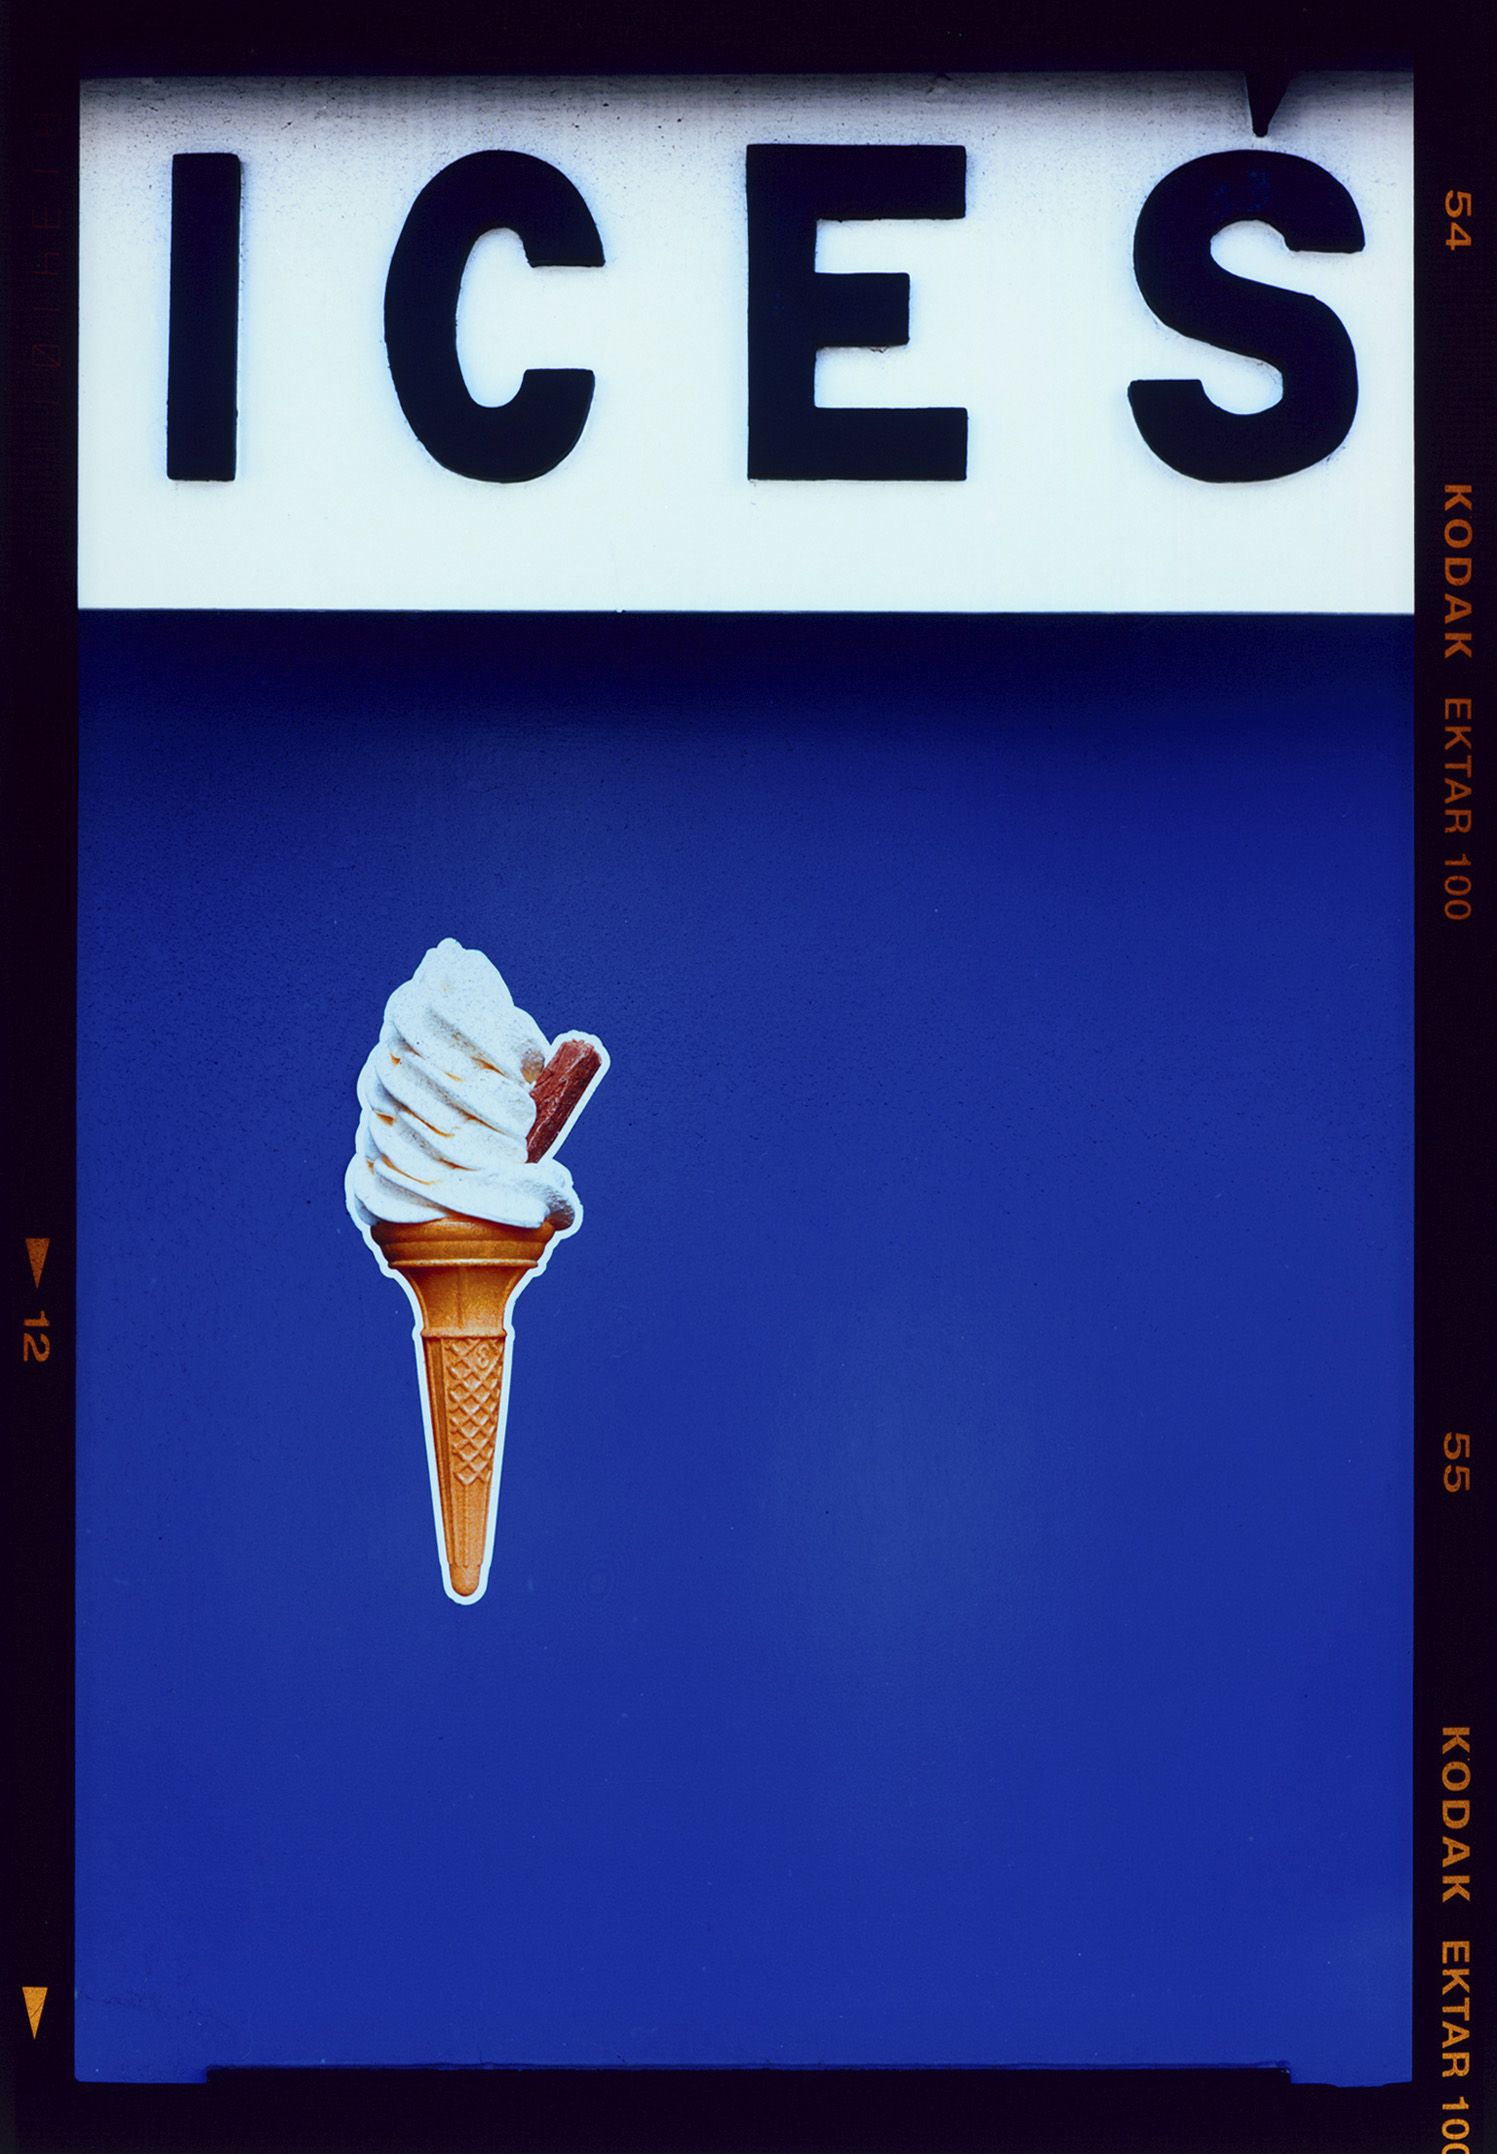 ICES, Bexhill-on-Sea by Richard Heeps